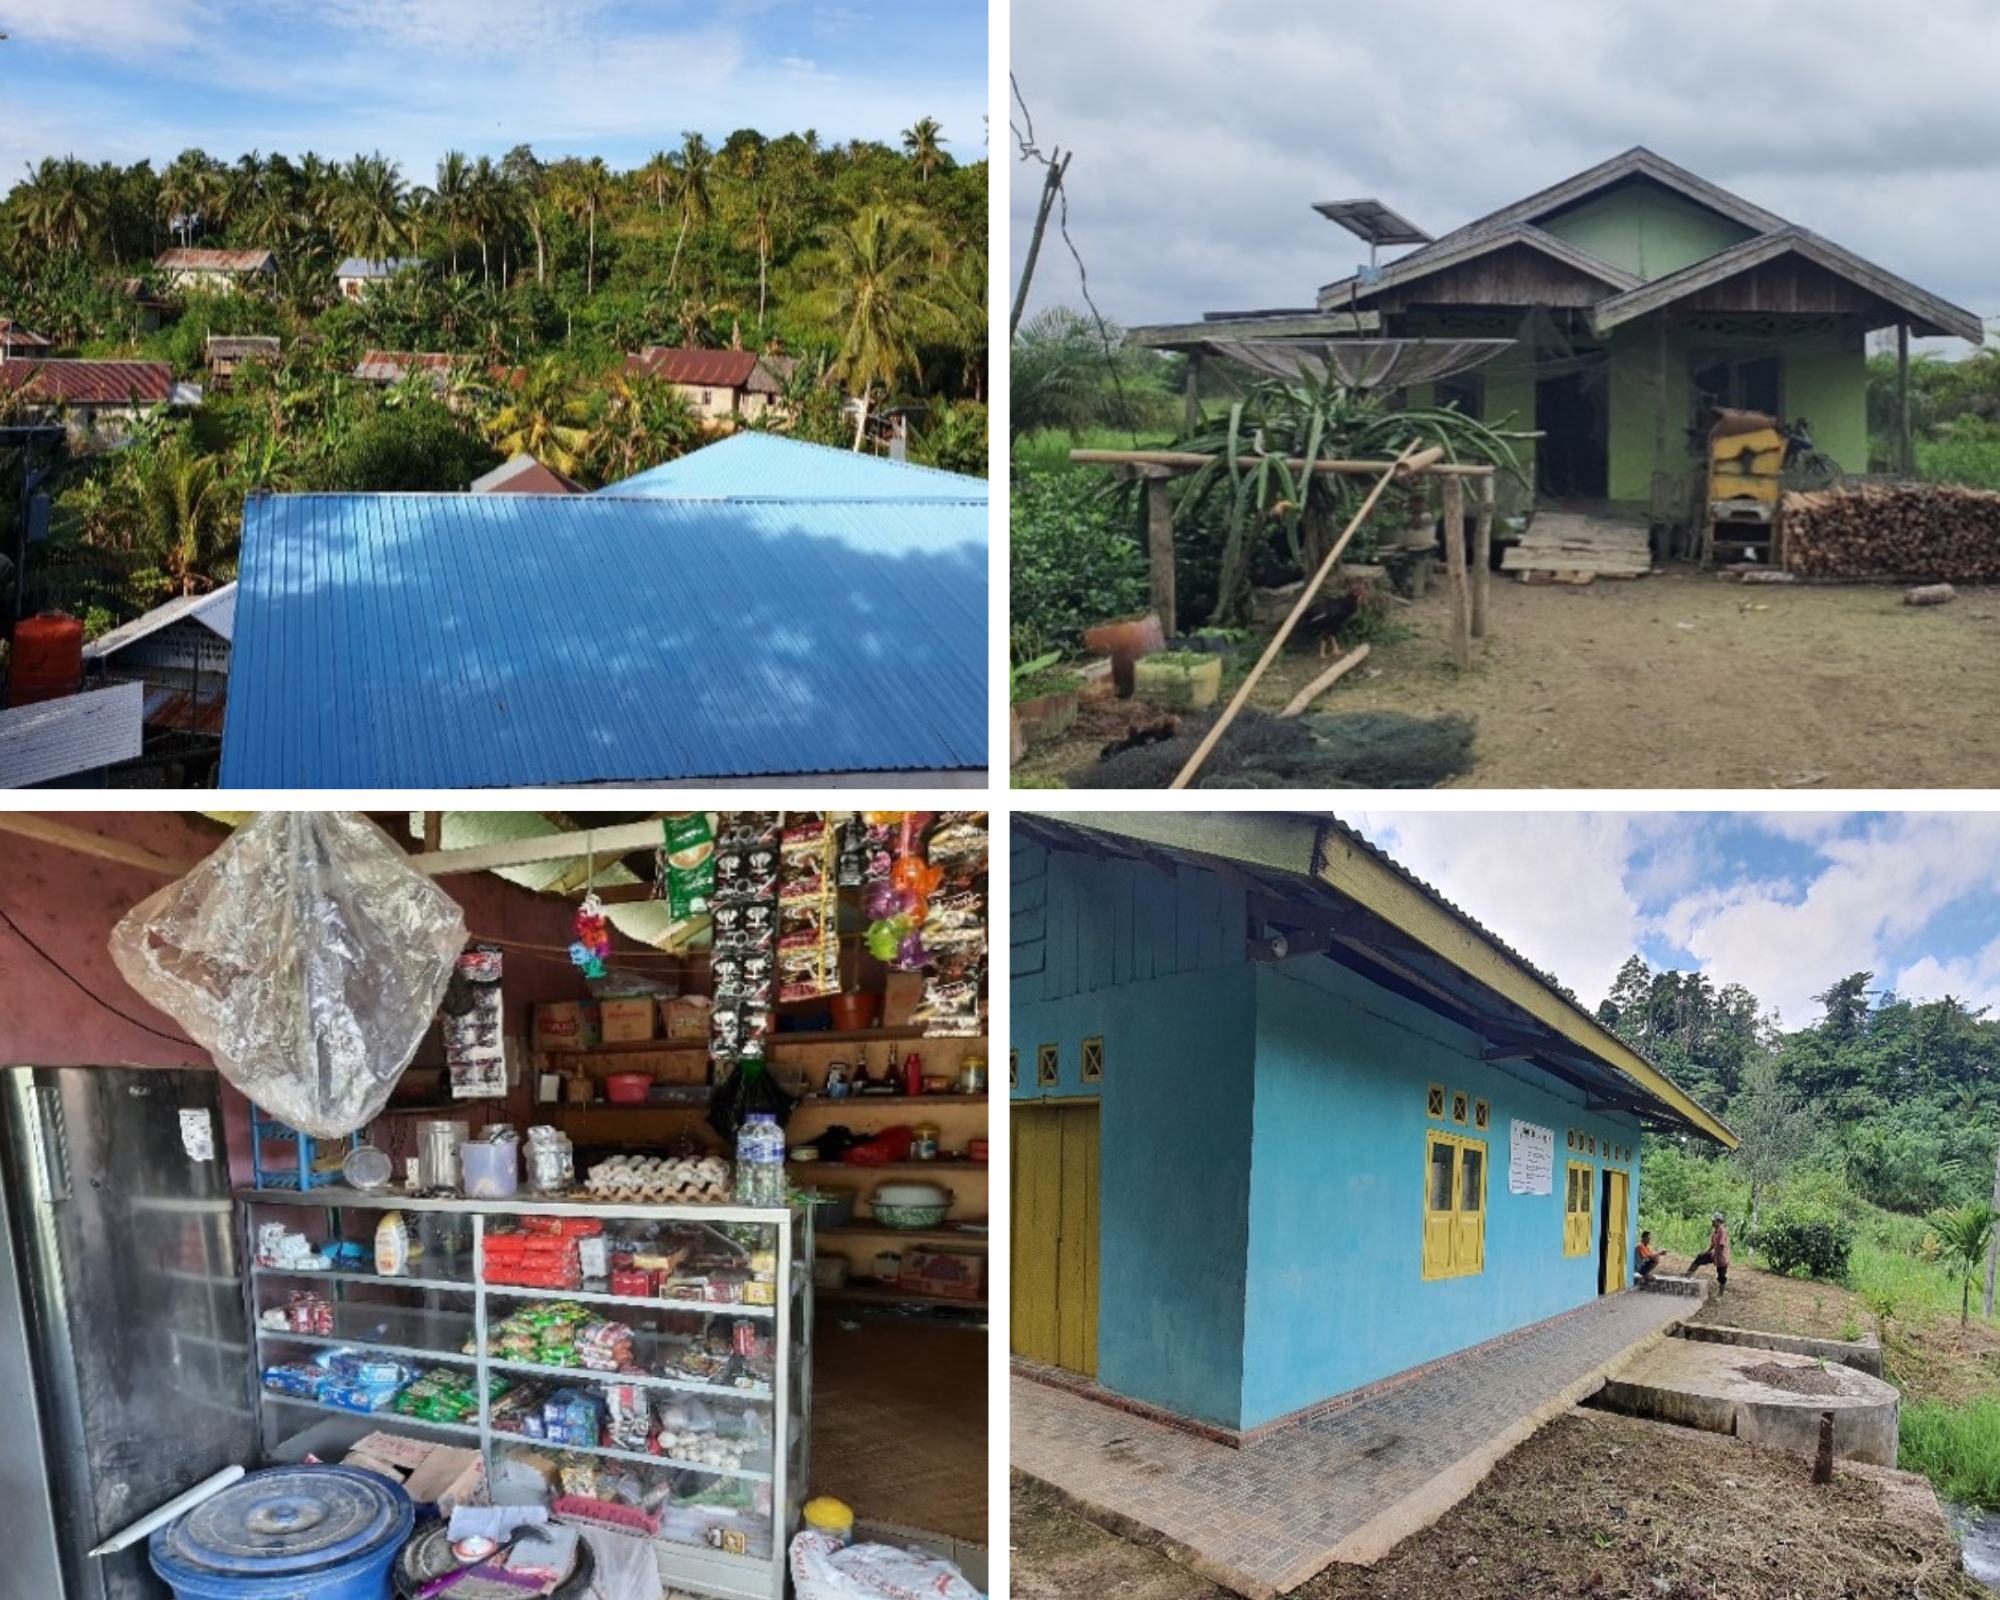 Counterclockwise from top left: (1) Community serviced by mini-grid, (2) Household with both SHS and grid connection, (3)Exterior of Micro-Hydro Power Turbine House, (4)Refrigeration previously powered by defunct mini-grid.